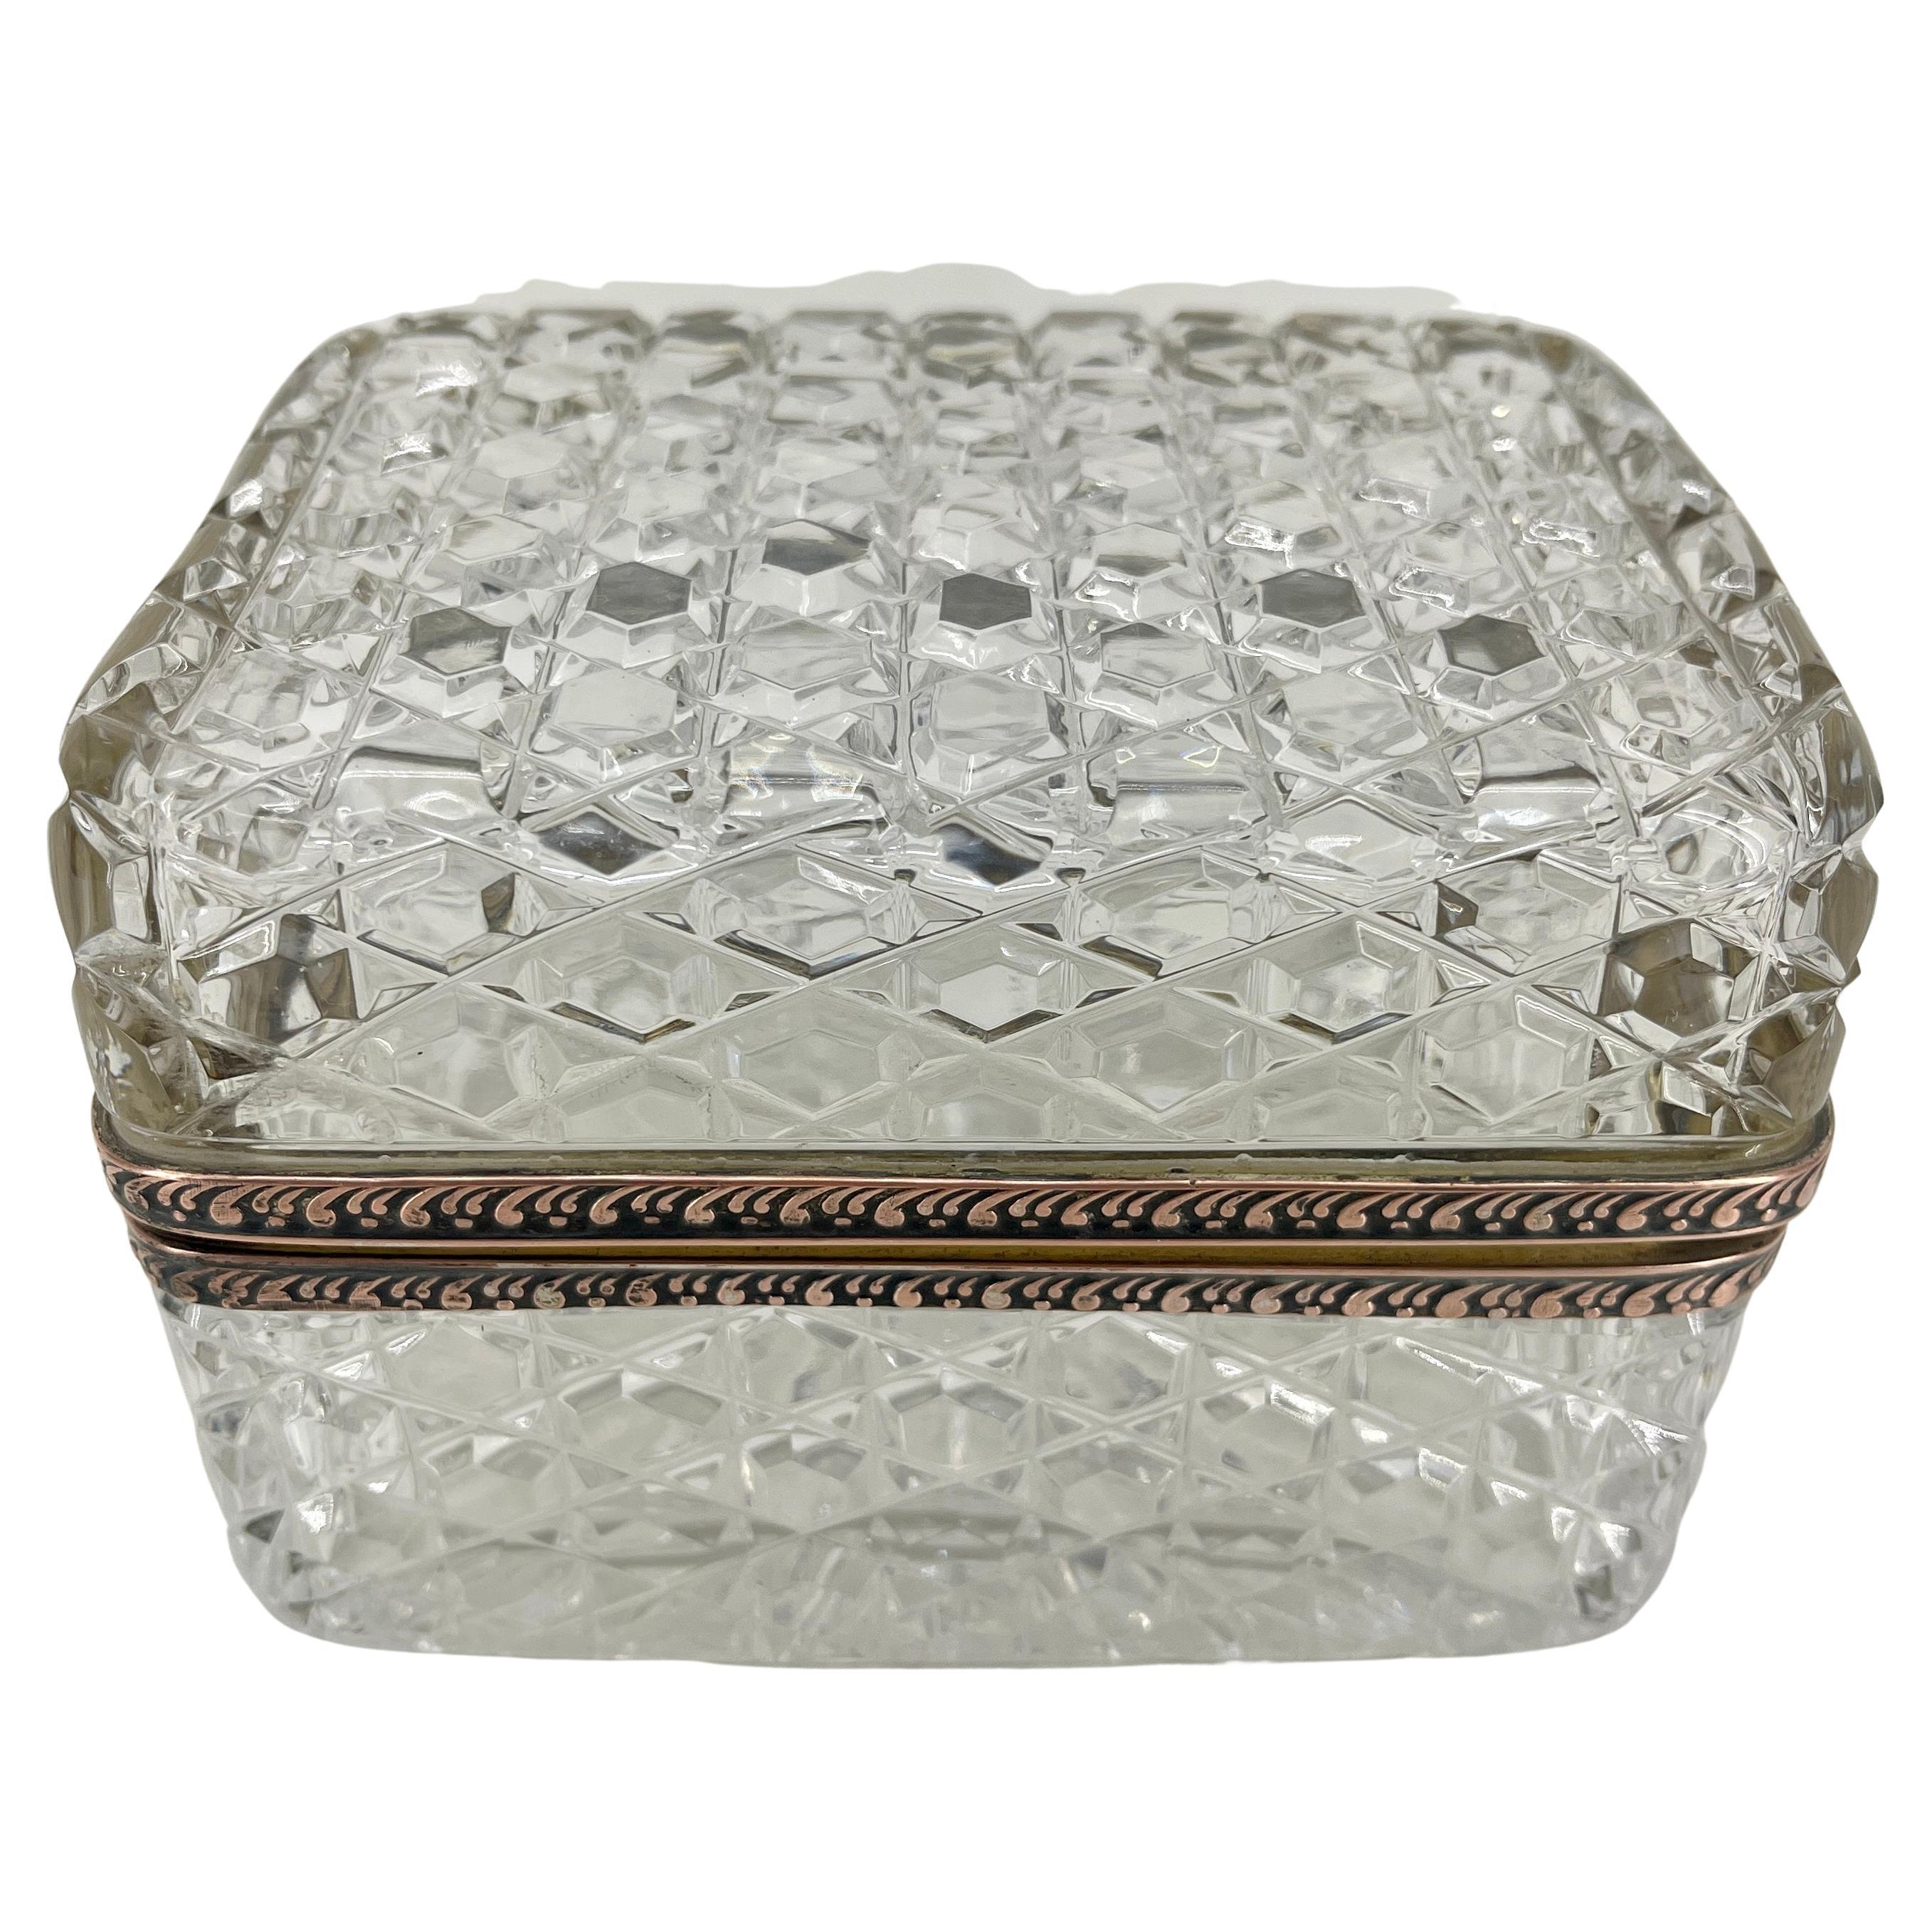 French Baccarat Style Cut Crystal Lidded Box with Brass Hardware